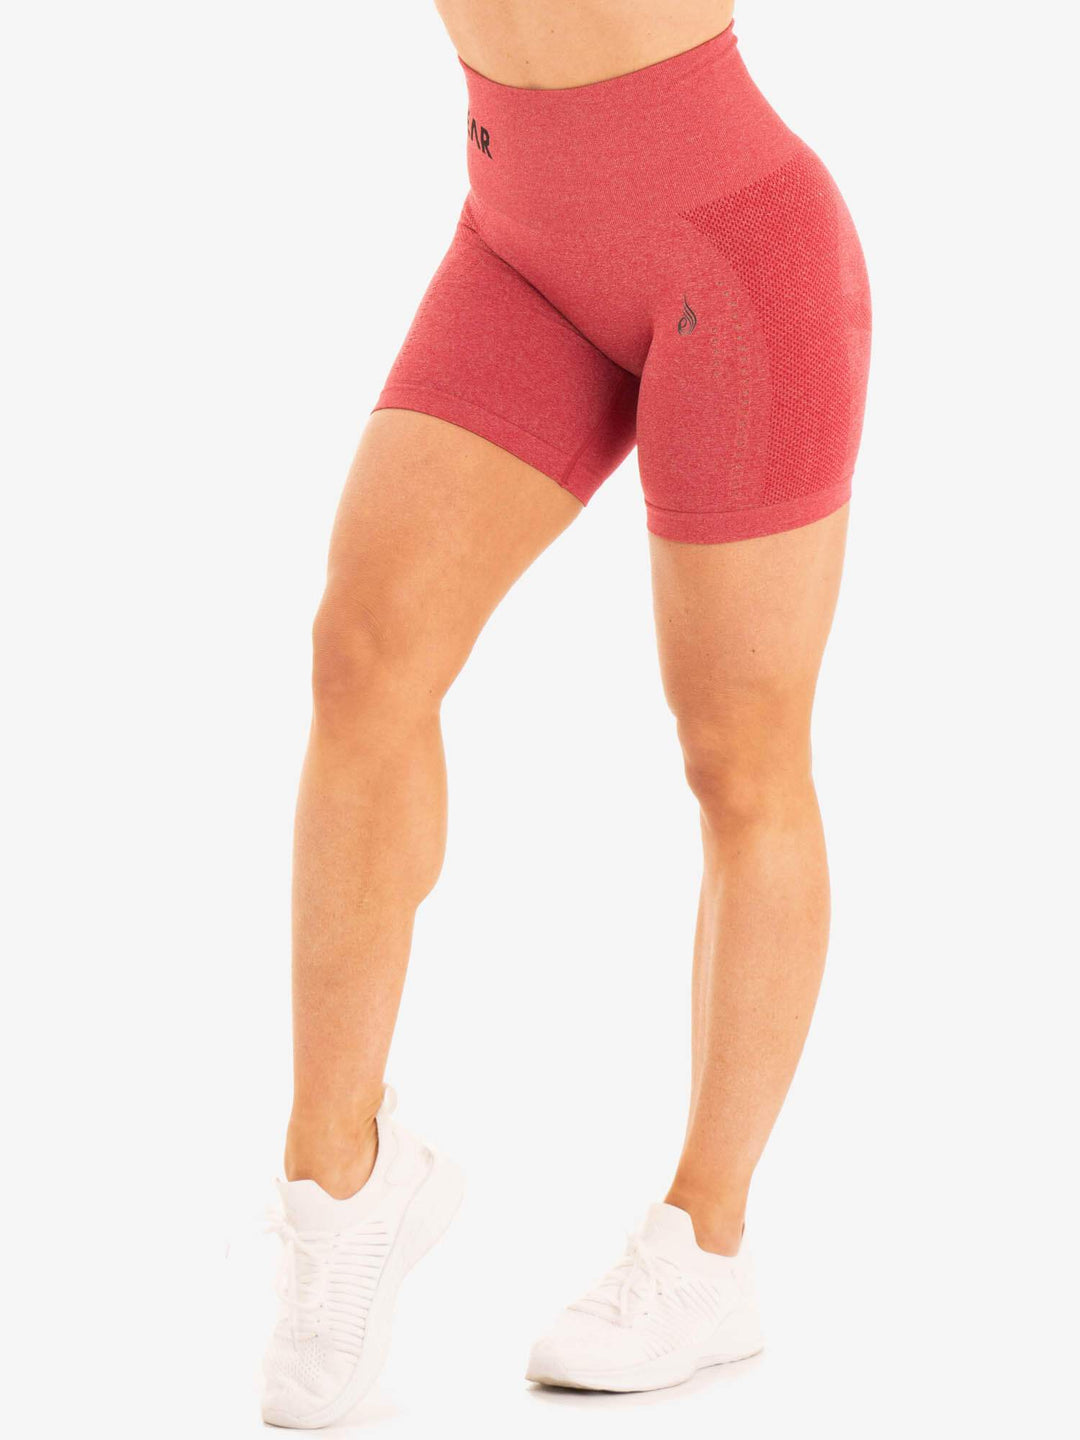 Seamless Staples Shorts - Cherry Red Marl Clothing Ryderwear 